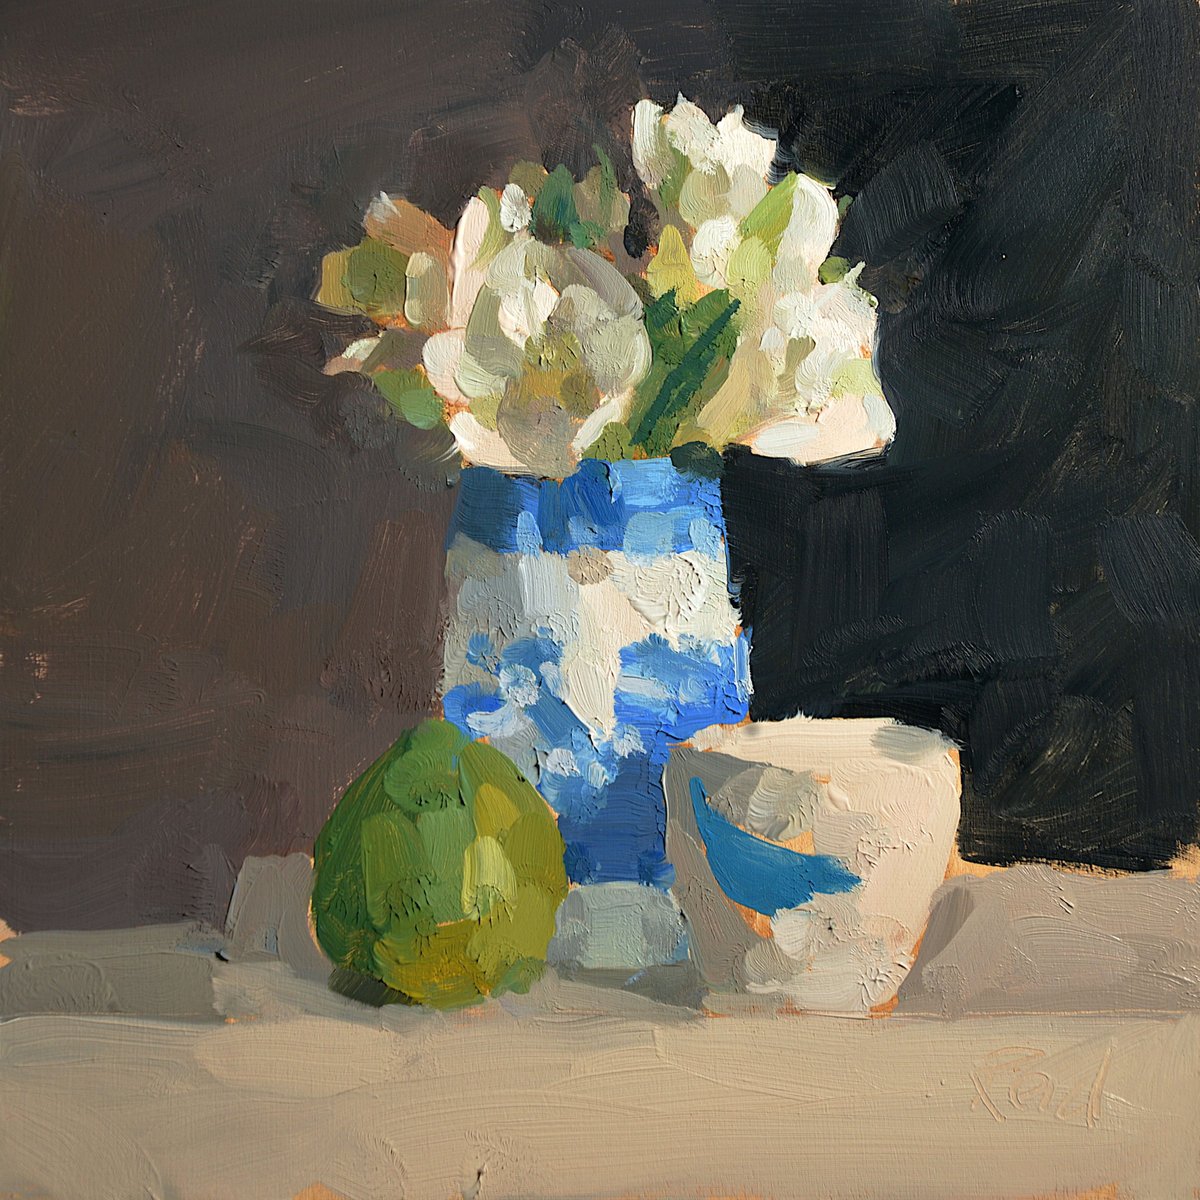 We're looking forward to a new collection of incredible still life artworks from David Reid -- look out for new works on our website soon!

#stilllifeart #scottishart #scottishartist #watsongallery #floral #flowers #contemporaryart #oilonboard #contemporaryimpressionism